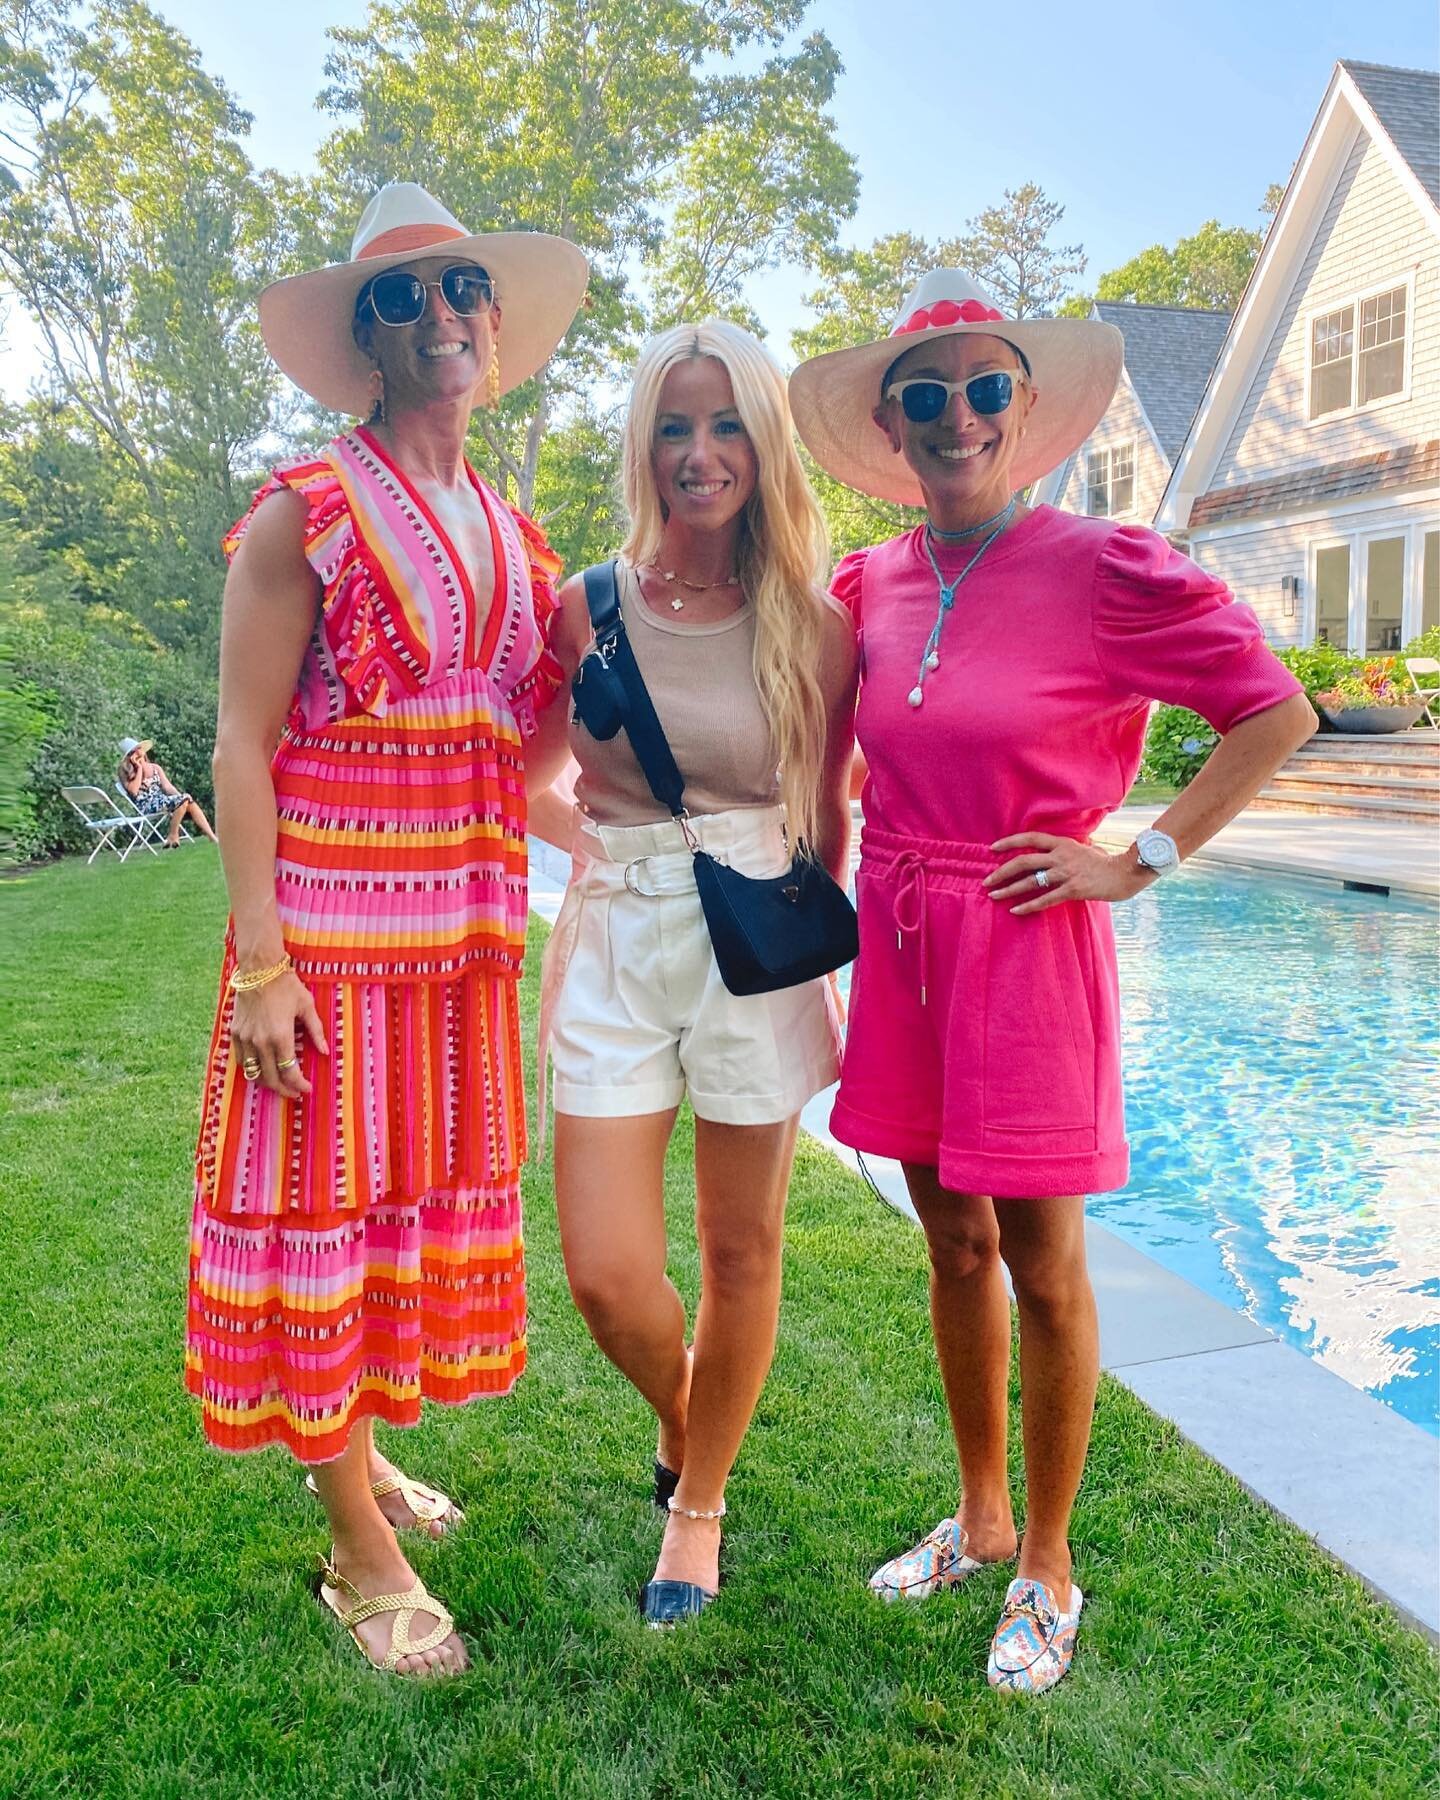 ☀️Loving all the pops of color on @hamptonsnystyle and @lisadcokinos at the @modatrova shopping event yesterday! The best part was doing a little summer shopping and hanging with these two amazing ladies! #summer #style #hamptons #hamptonsstyle #nyc 